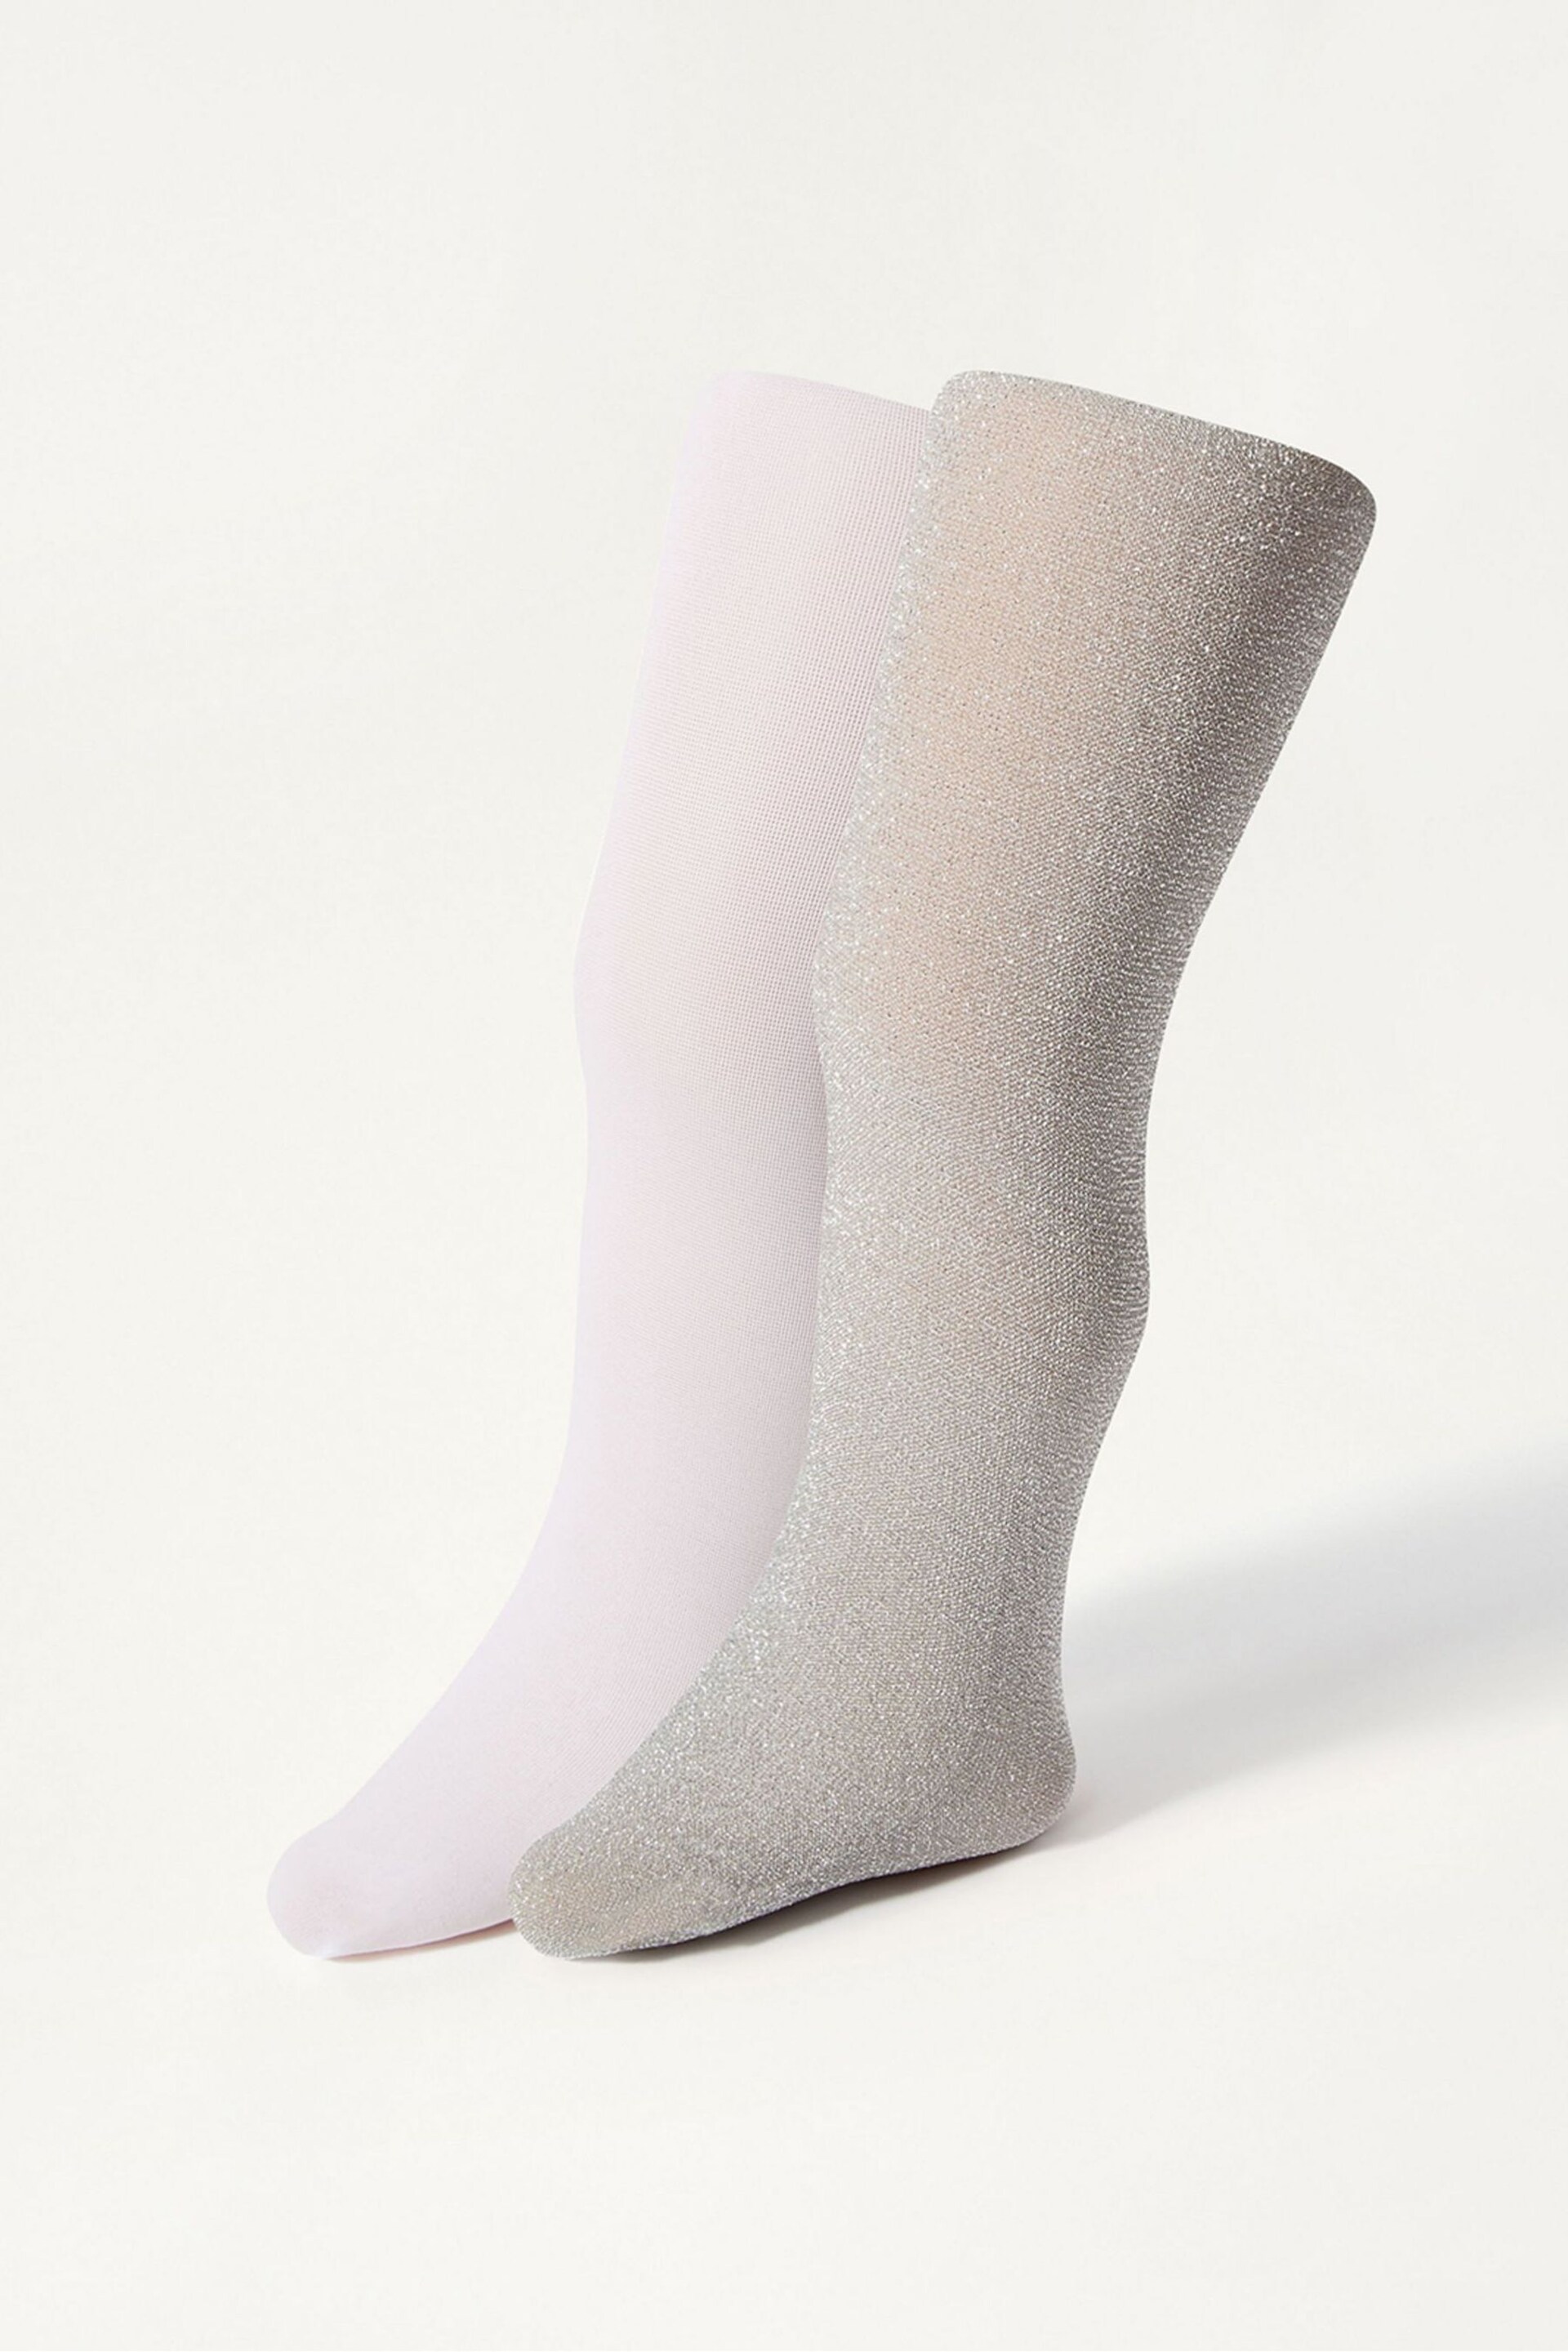 Monsoon Silver Baby Sparkly Tights 2 Pack - Image 3 of 3